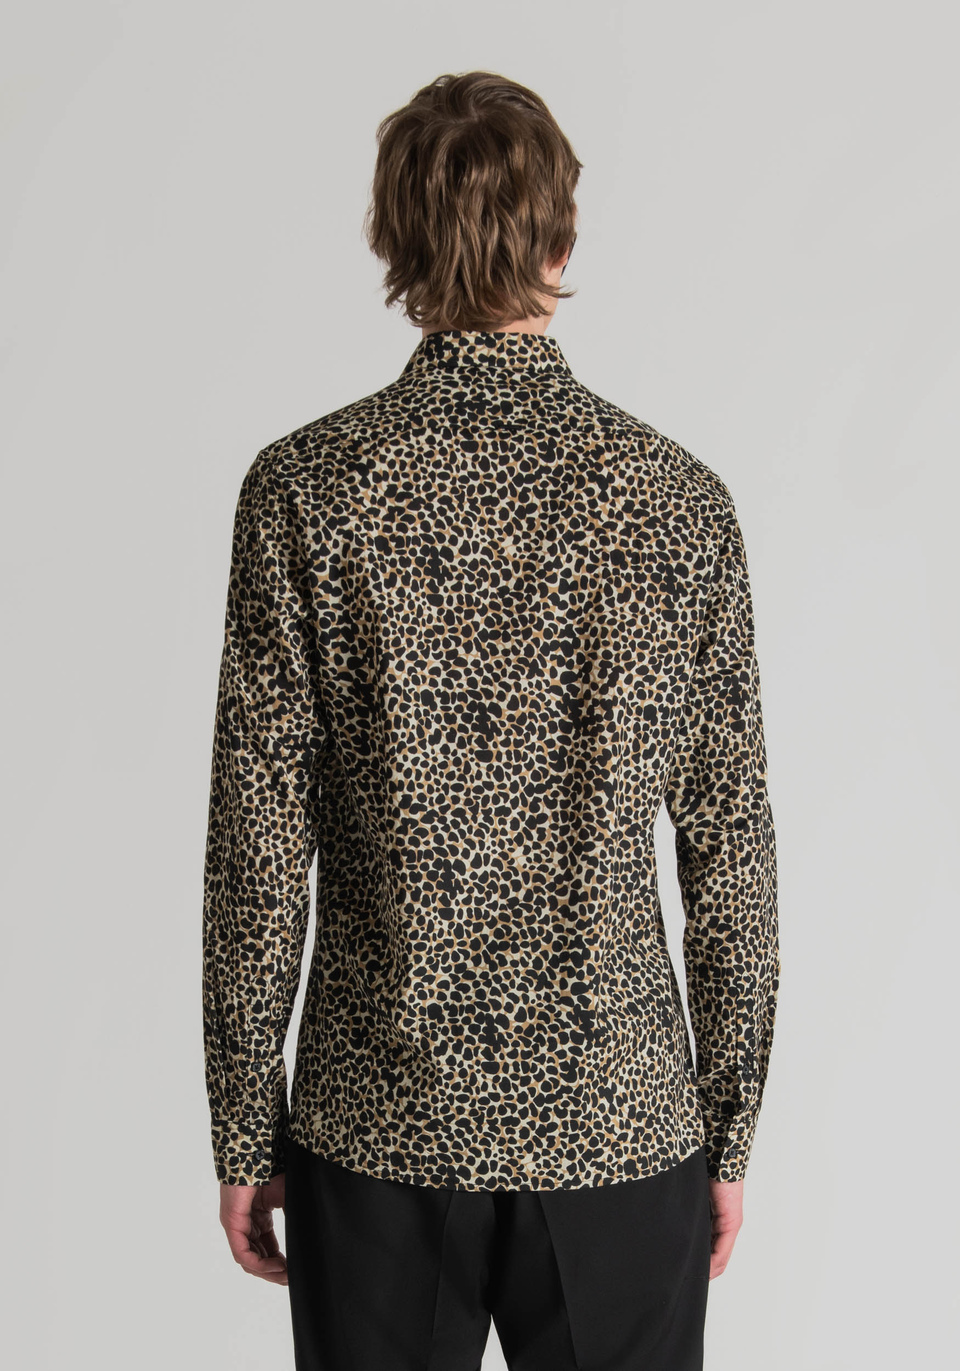 STRAIGHT-FIT SHIRT IN PURE COTTON WITH ANIMAL PRINT - Antony Morato Online Shop